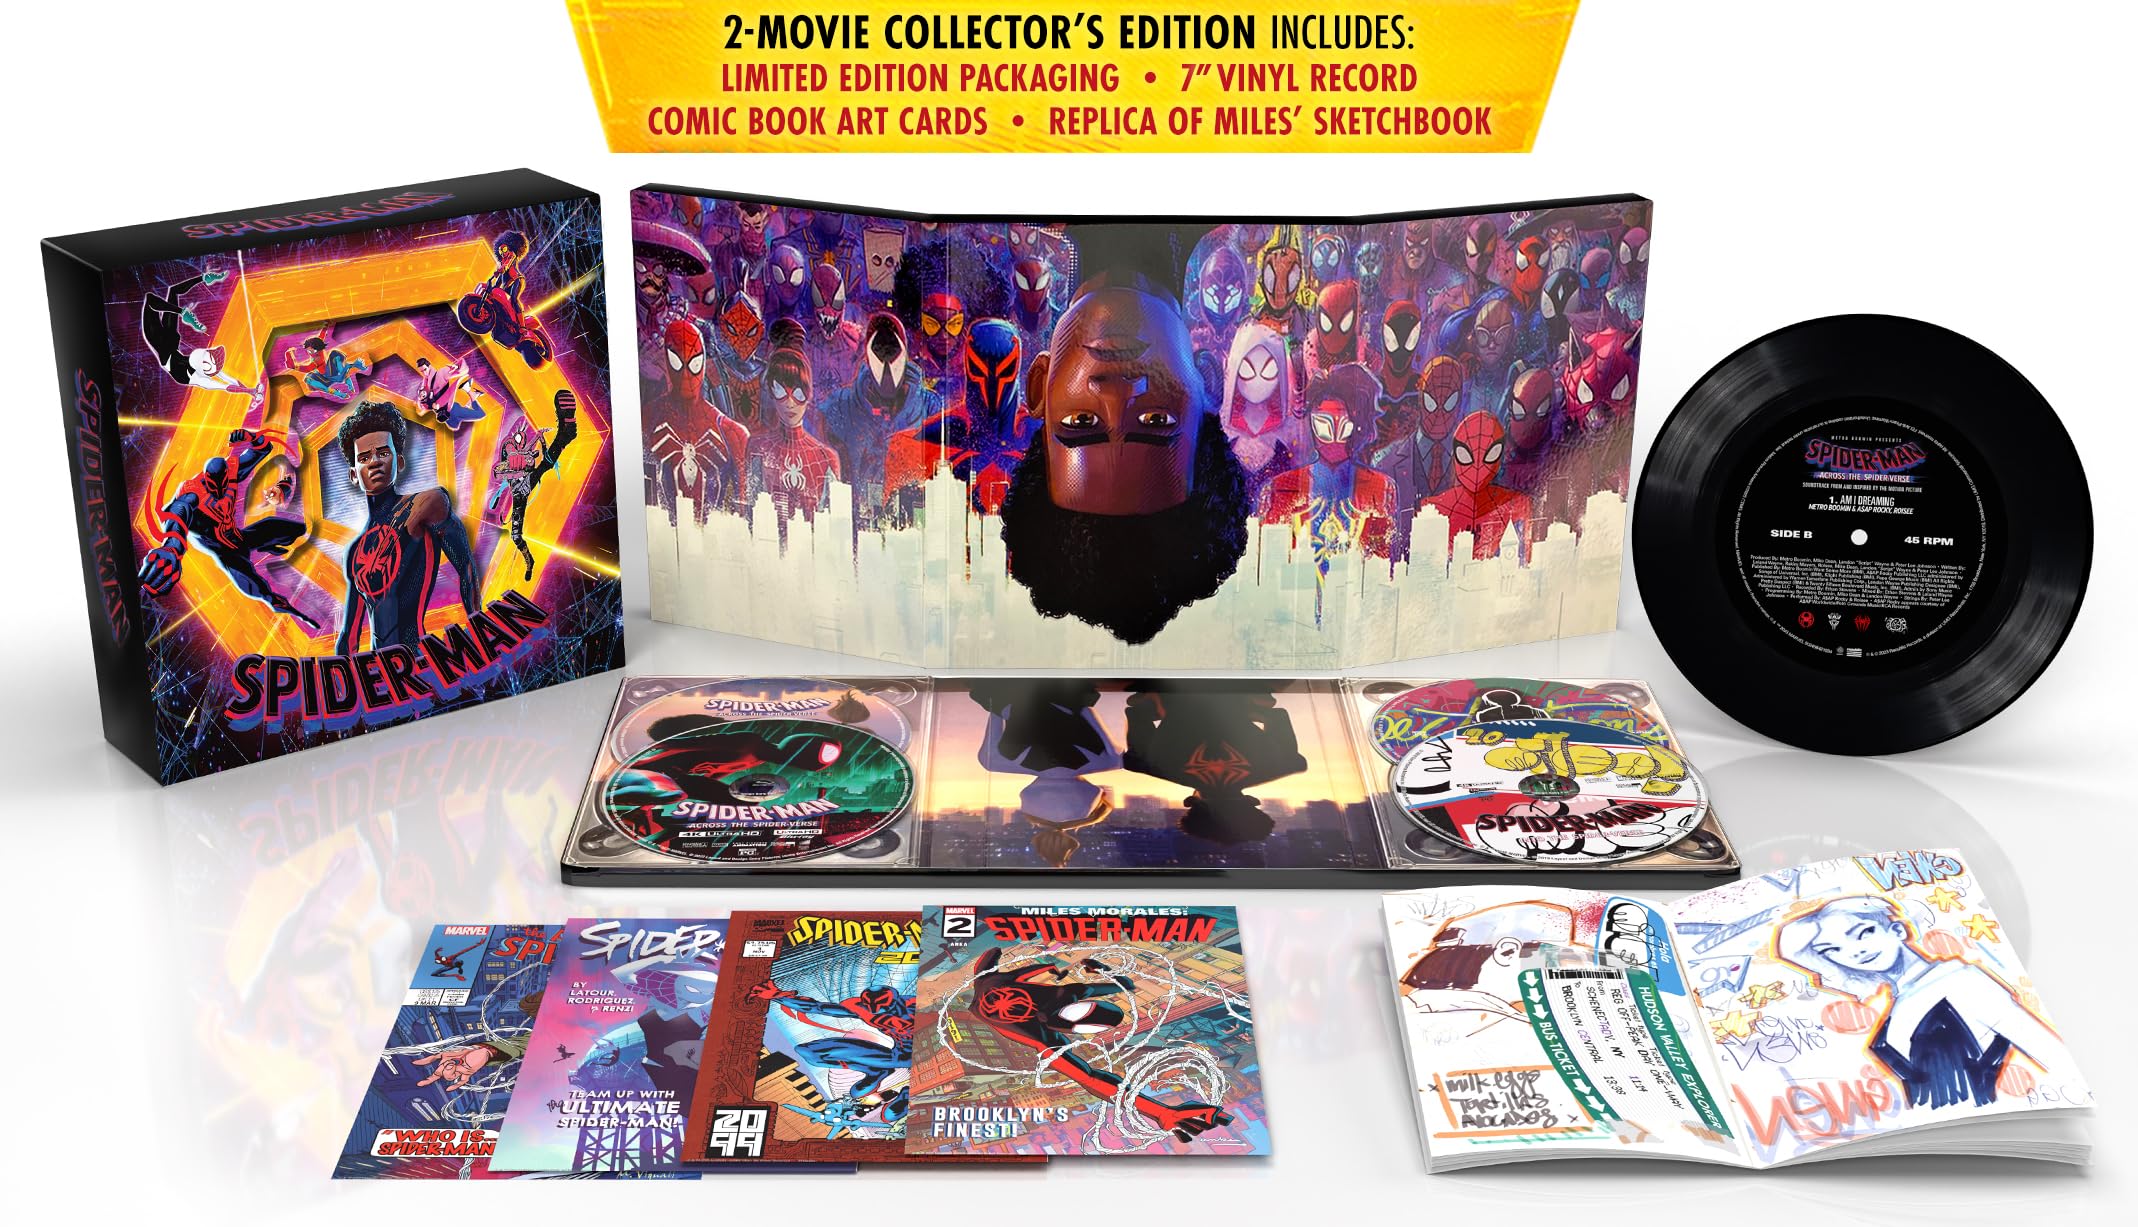 2-Movie Spider-Verse Collector's Edition (4K Ultra HD + Blu-Ray + Digital Copy) $70 + Free Shipping